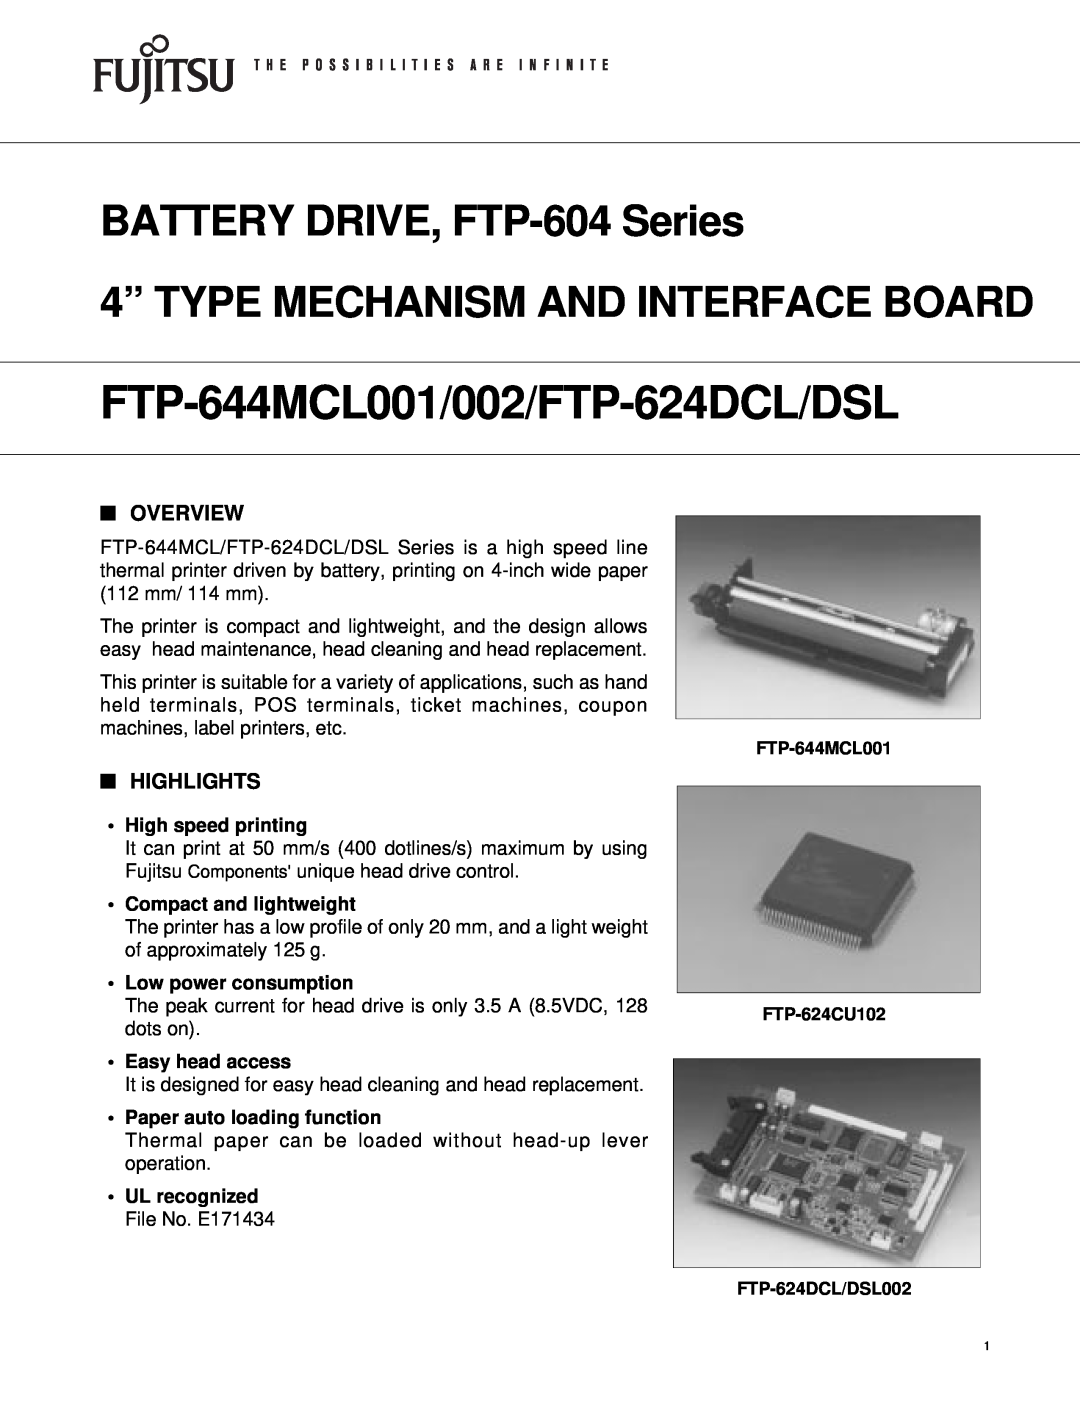 Fujitsu FTP-644MCL001 manual Overview, Highlights, High speed printing, Compact and lightweight, Low power consumption 